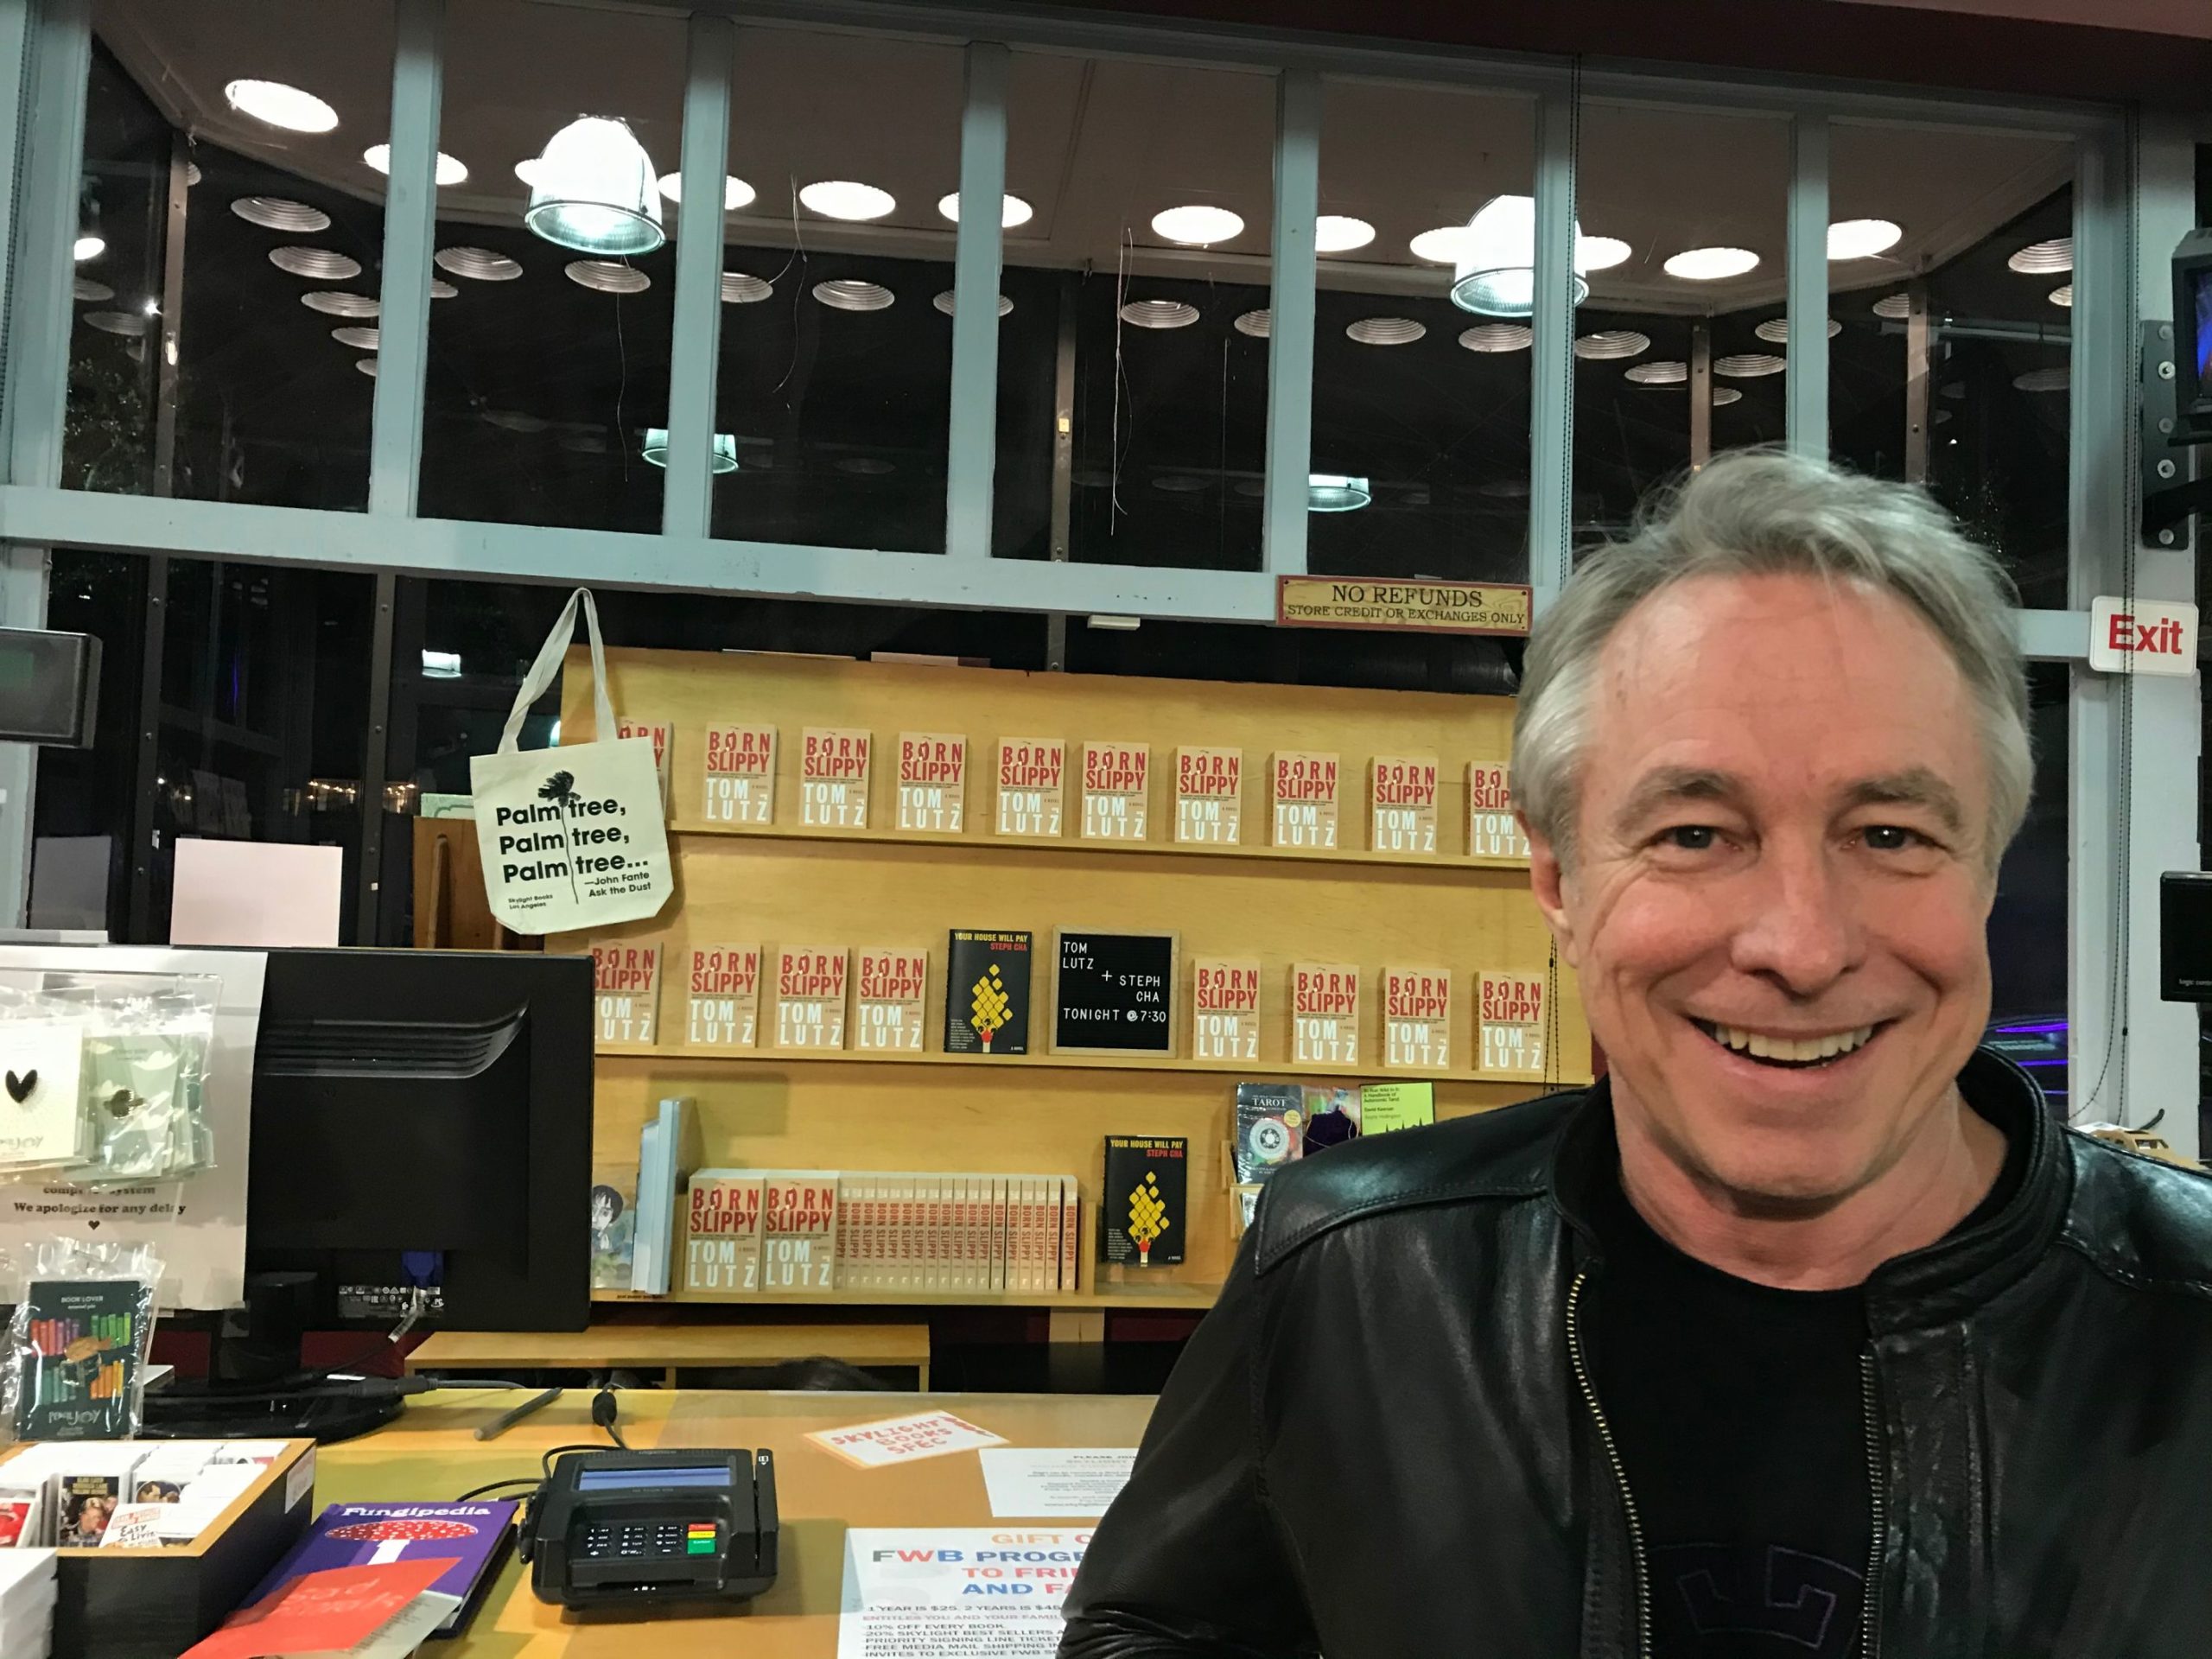 Tom Lutz's book launch at Skylight Books